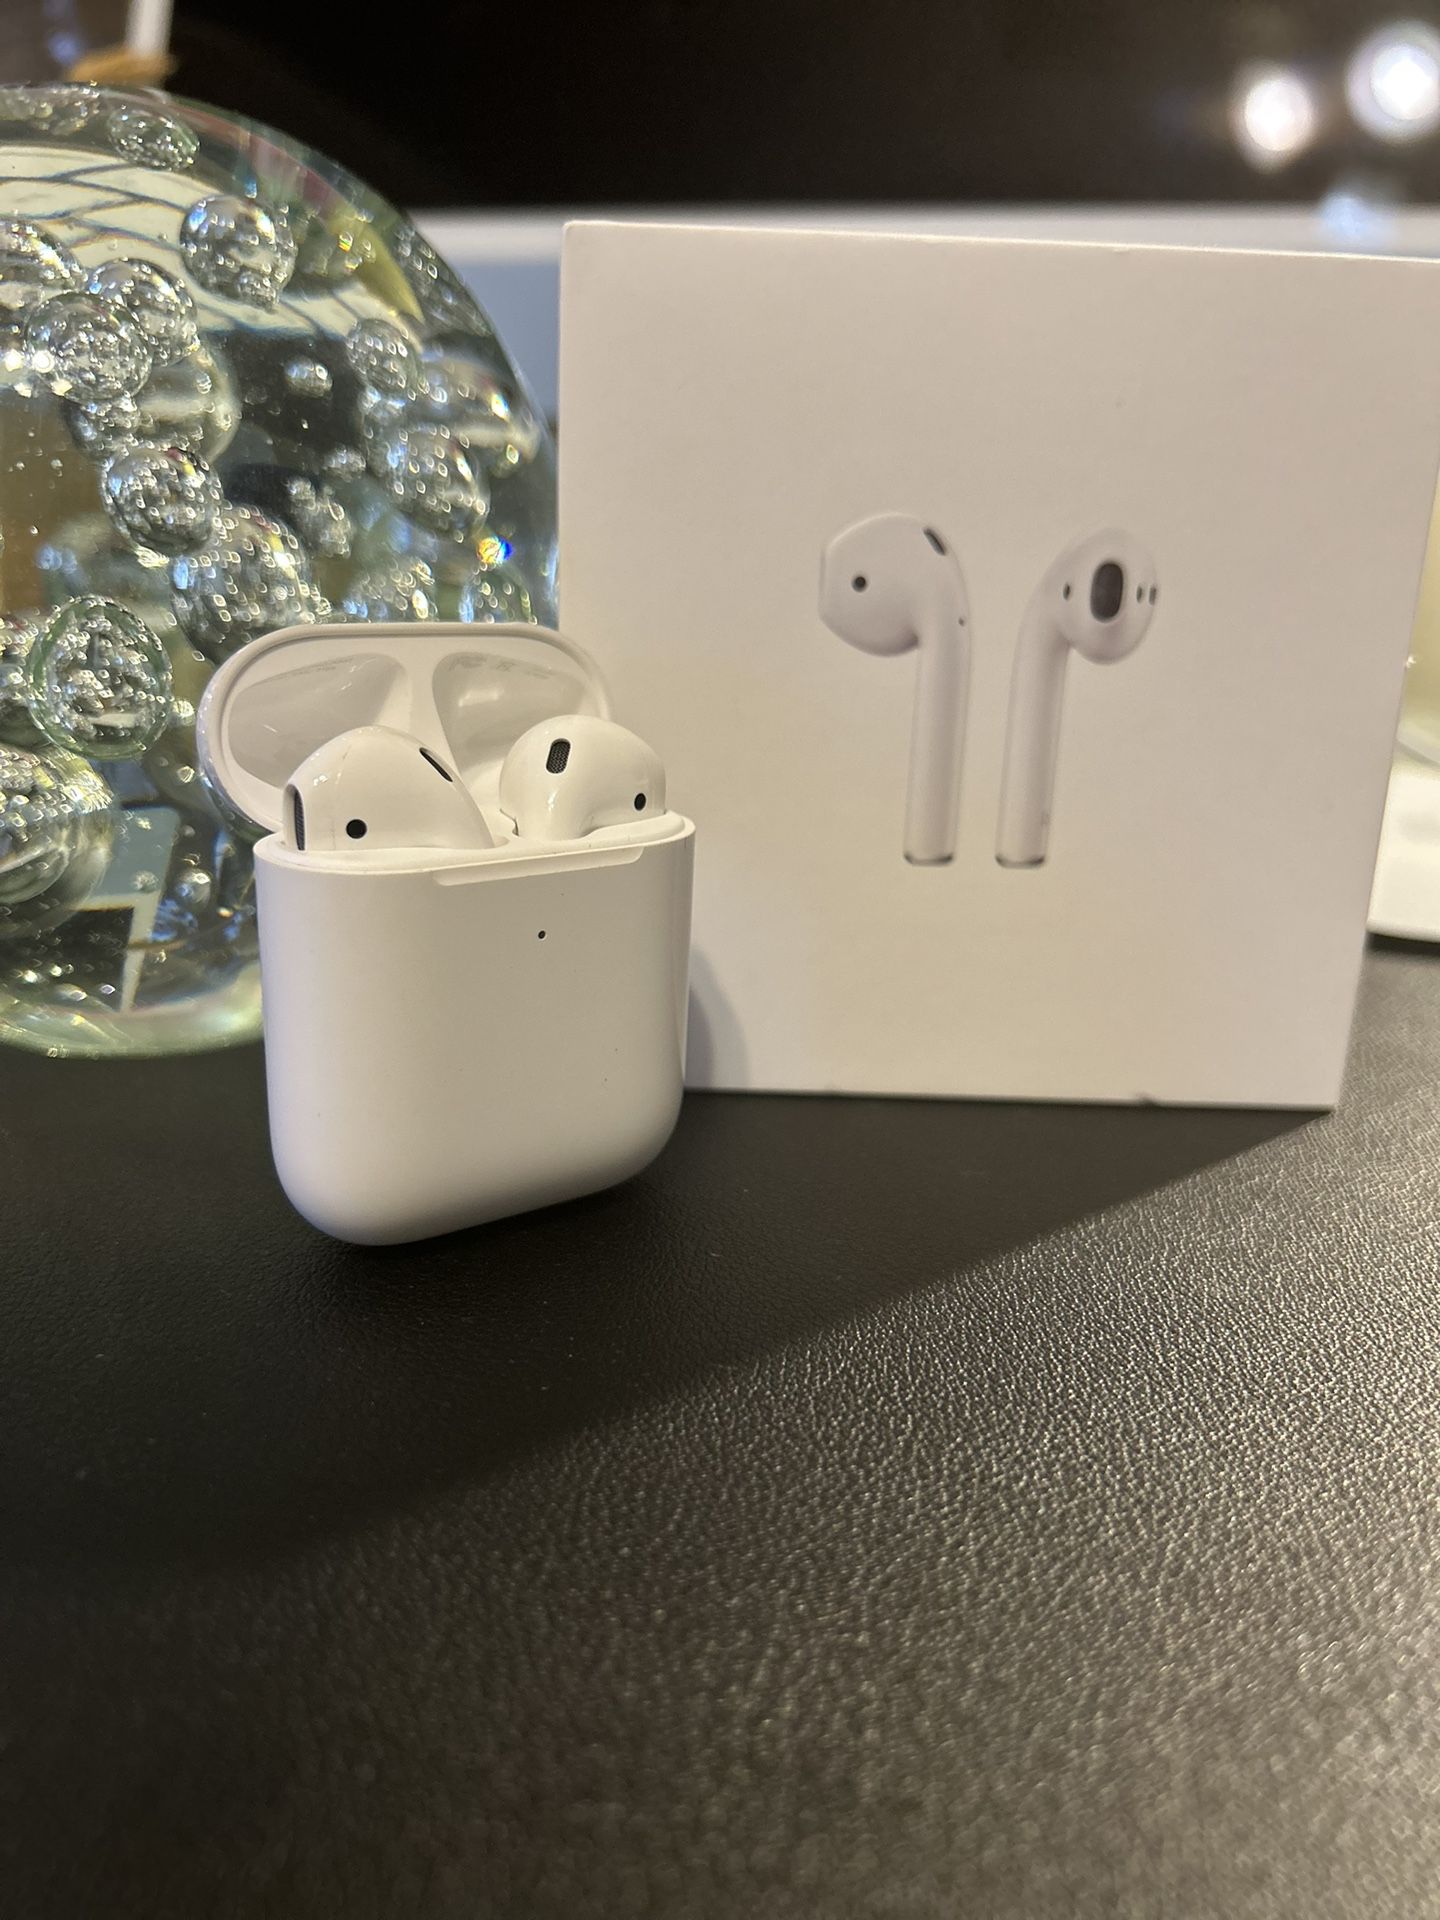 Apple AirPods w/Wireless Charging Case